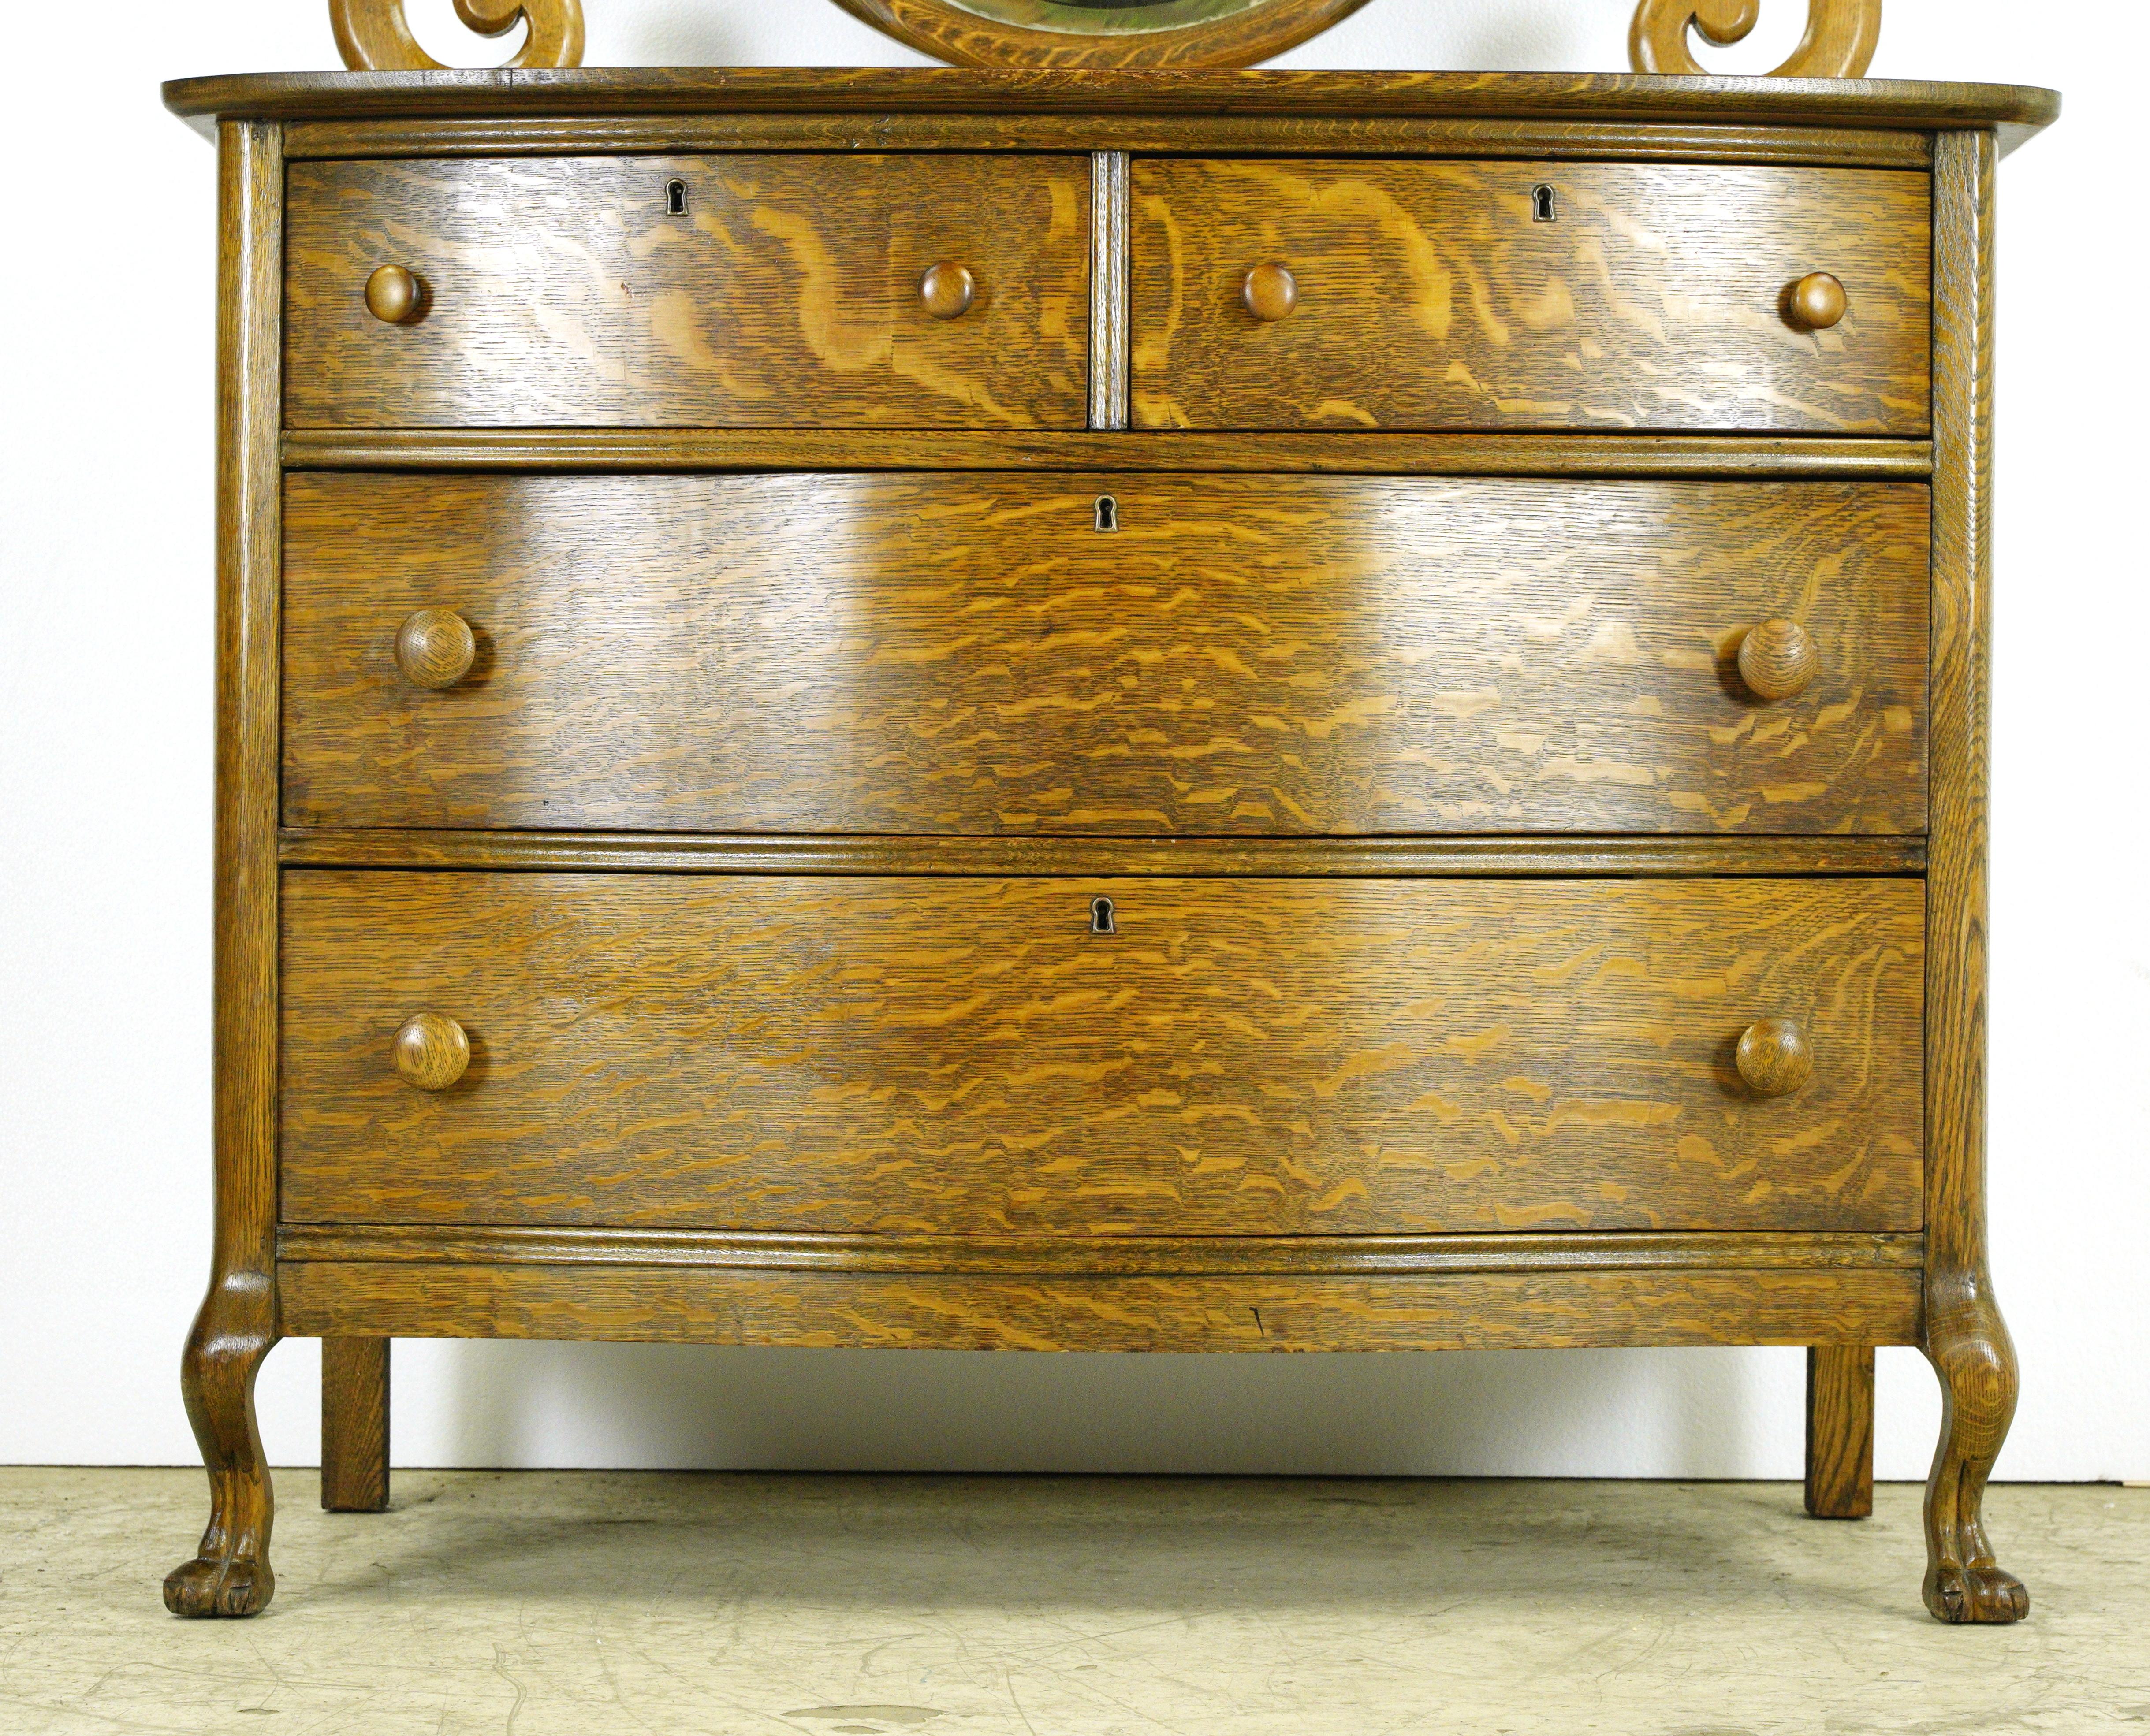 Dark tone antique tiger oak dresser with four dovetailed drawers, a beveled oval mirror and carved claw feet front legs. Good condition with appropriate wear from age. One available. Please note, this item is located in one of our NYC locations.